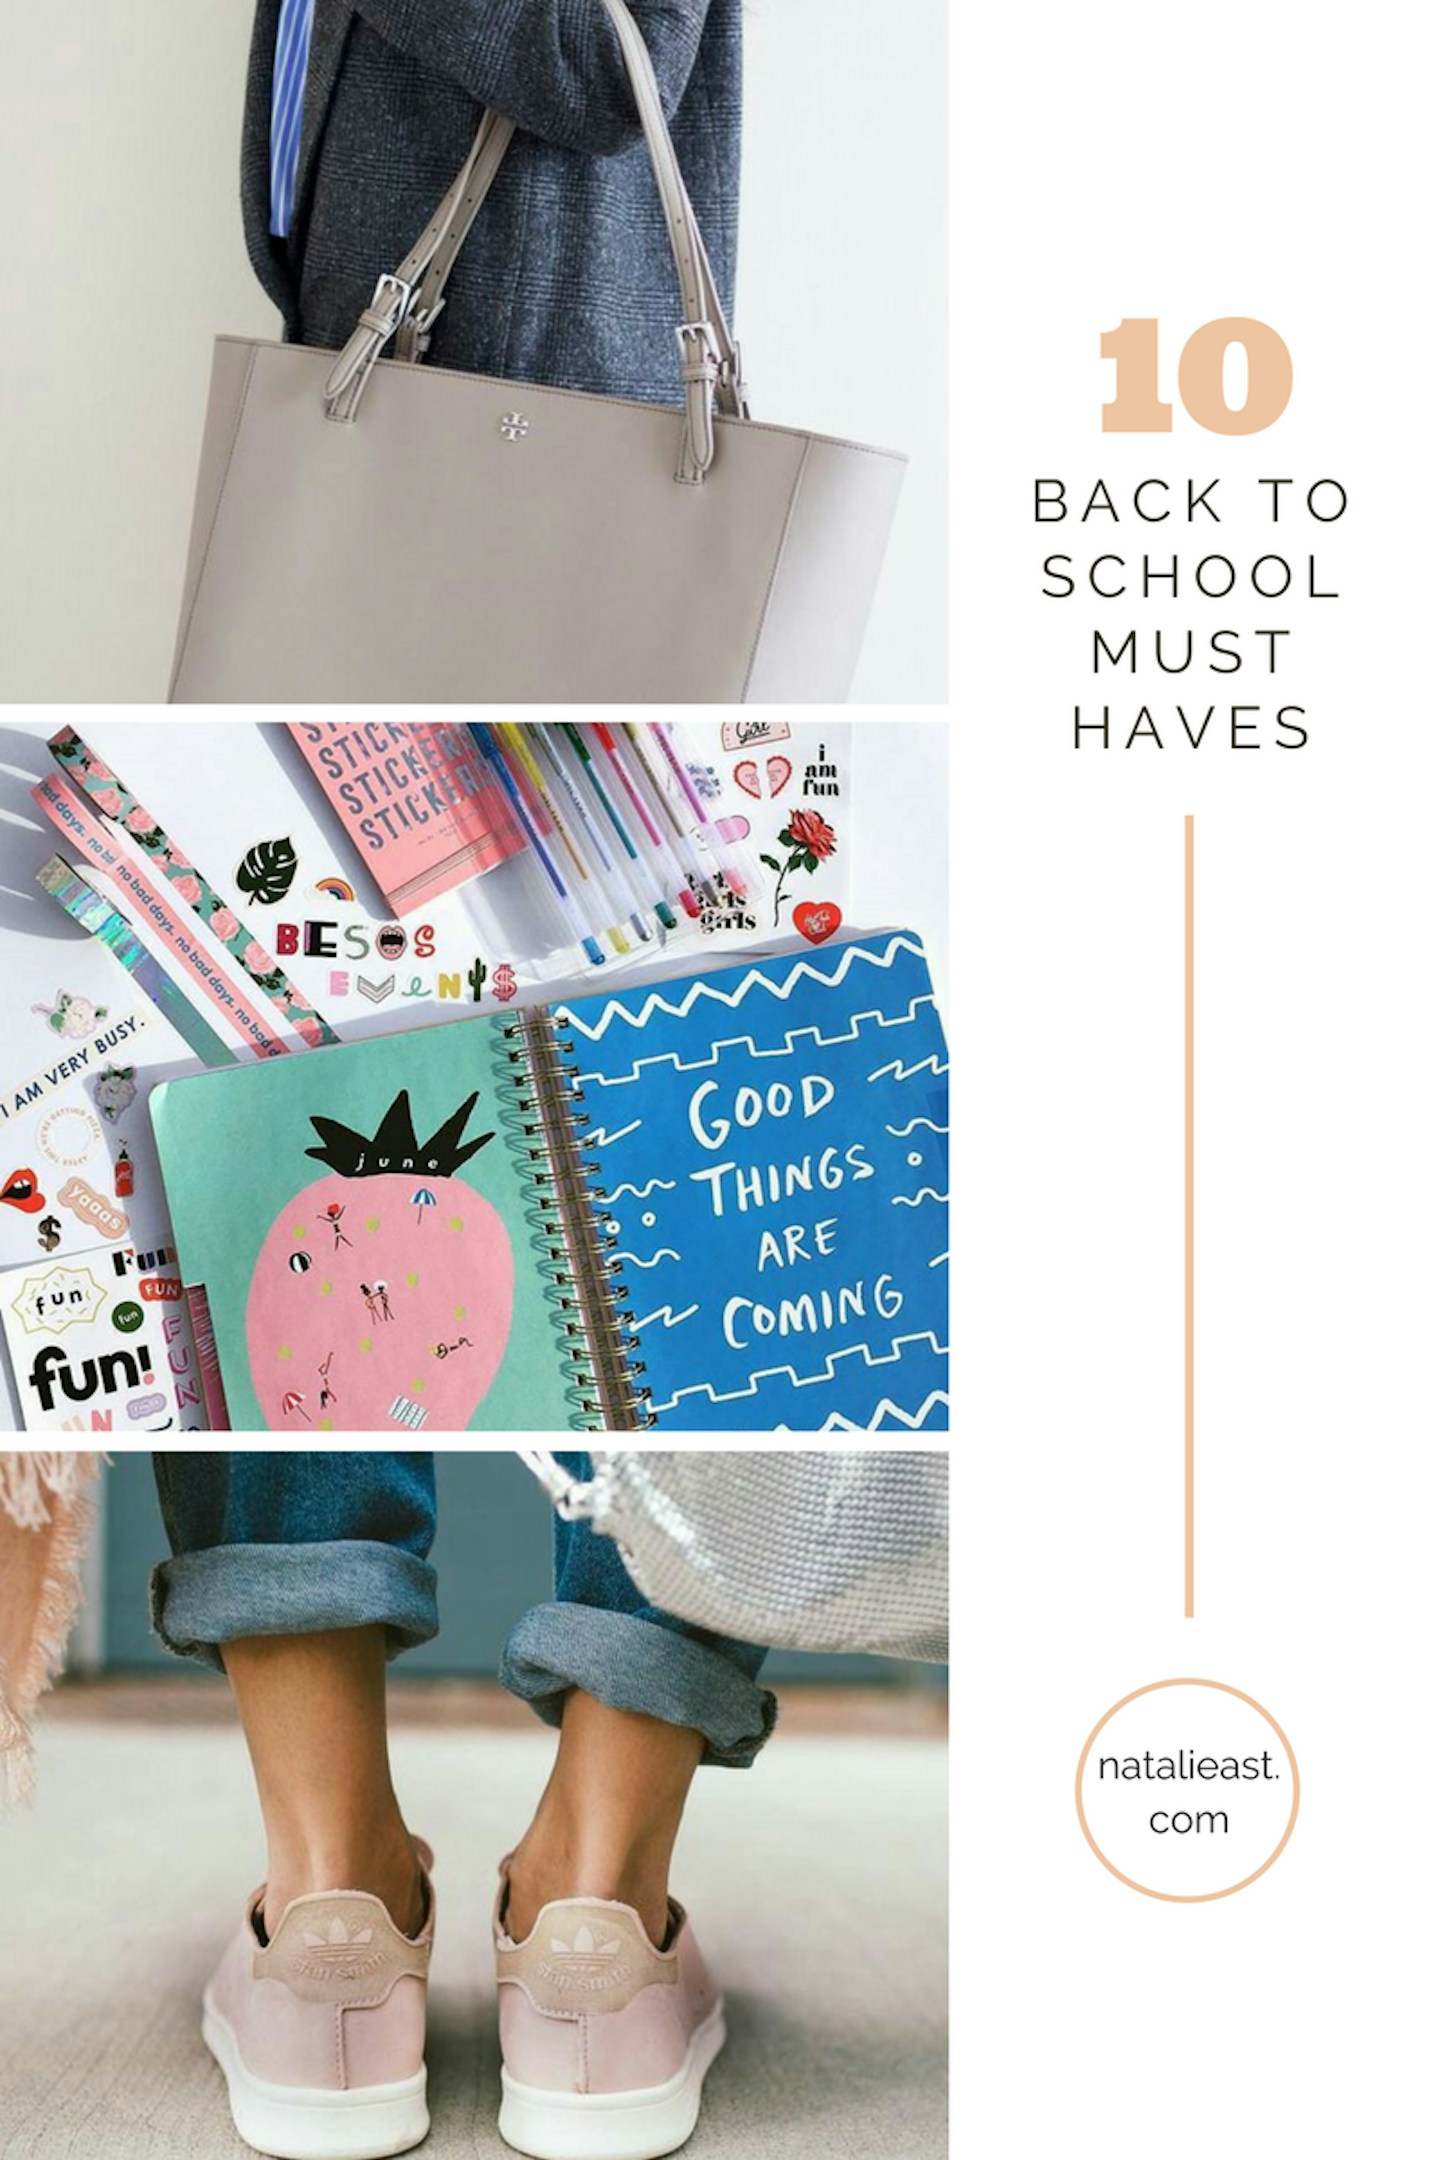 10 must-haves for back to school